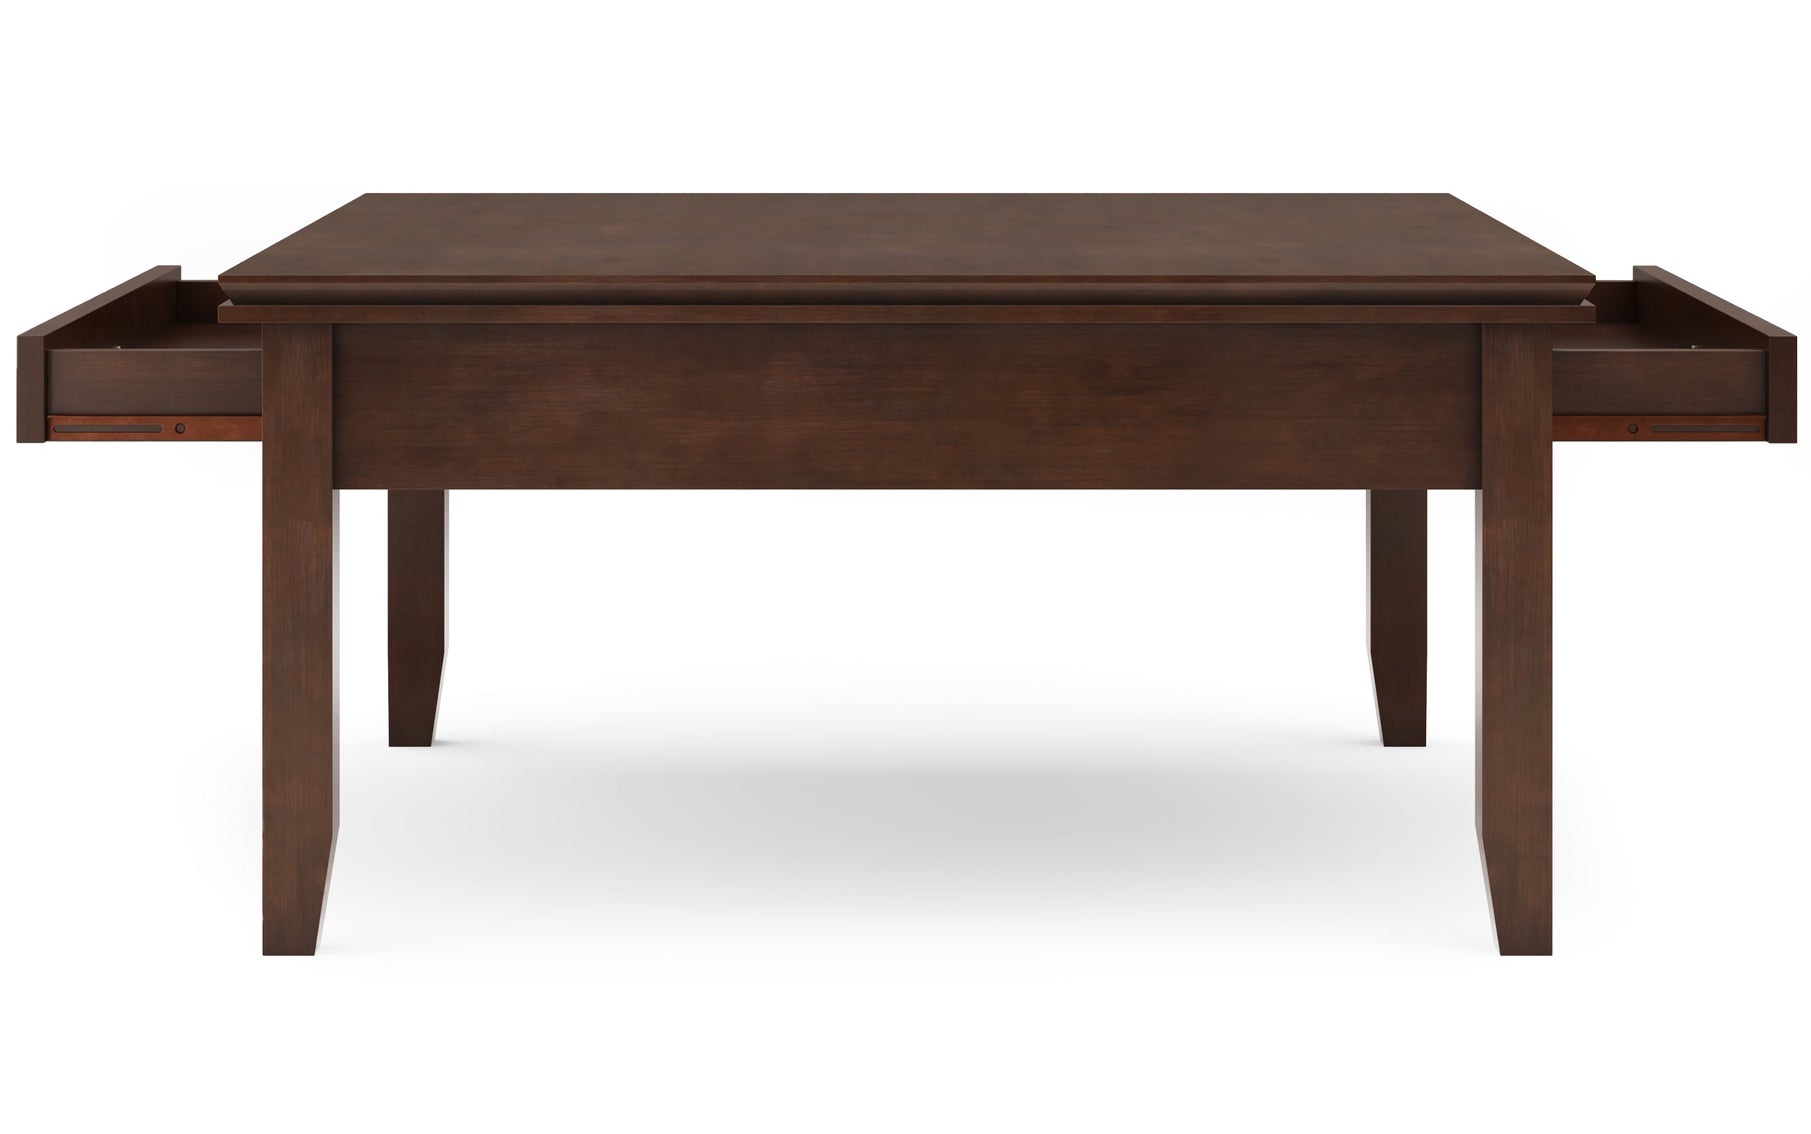 Russet Brown | Artisan Square Coffee Table